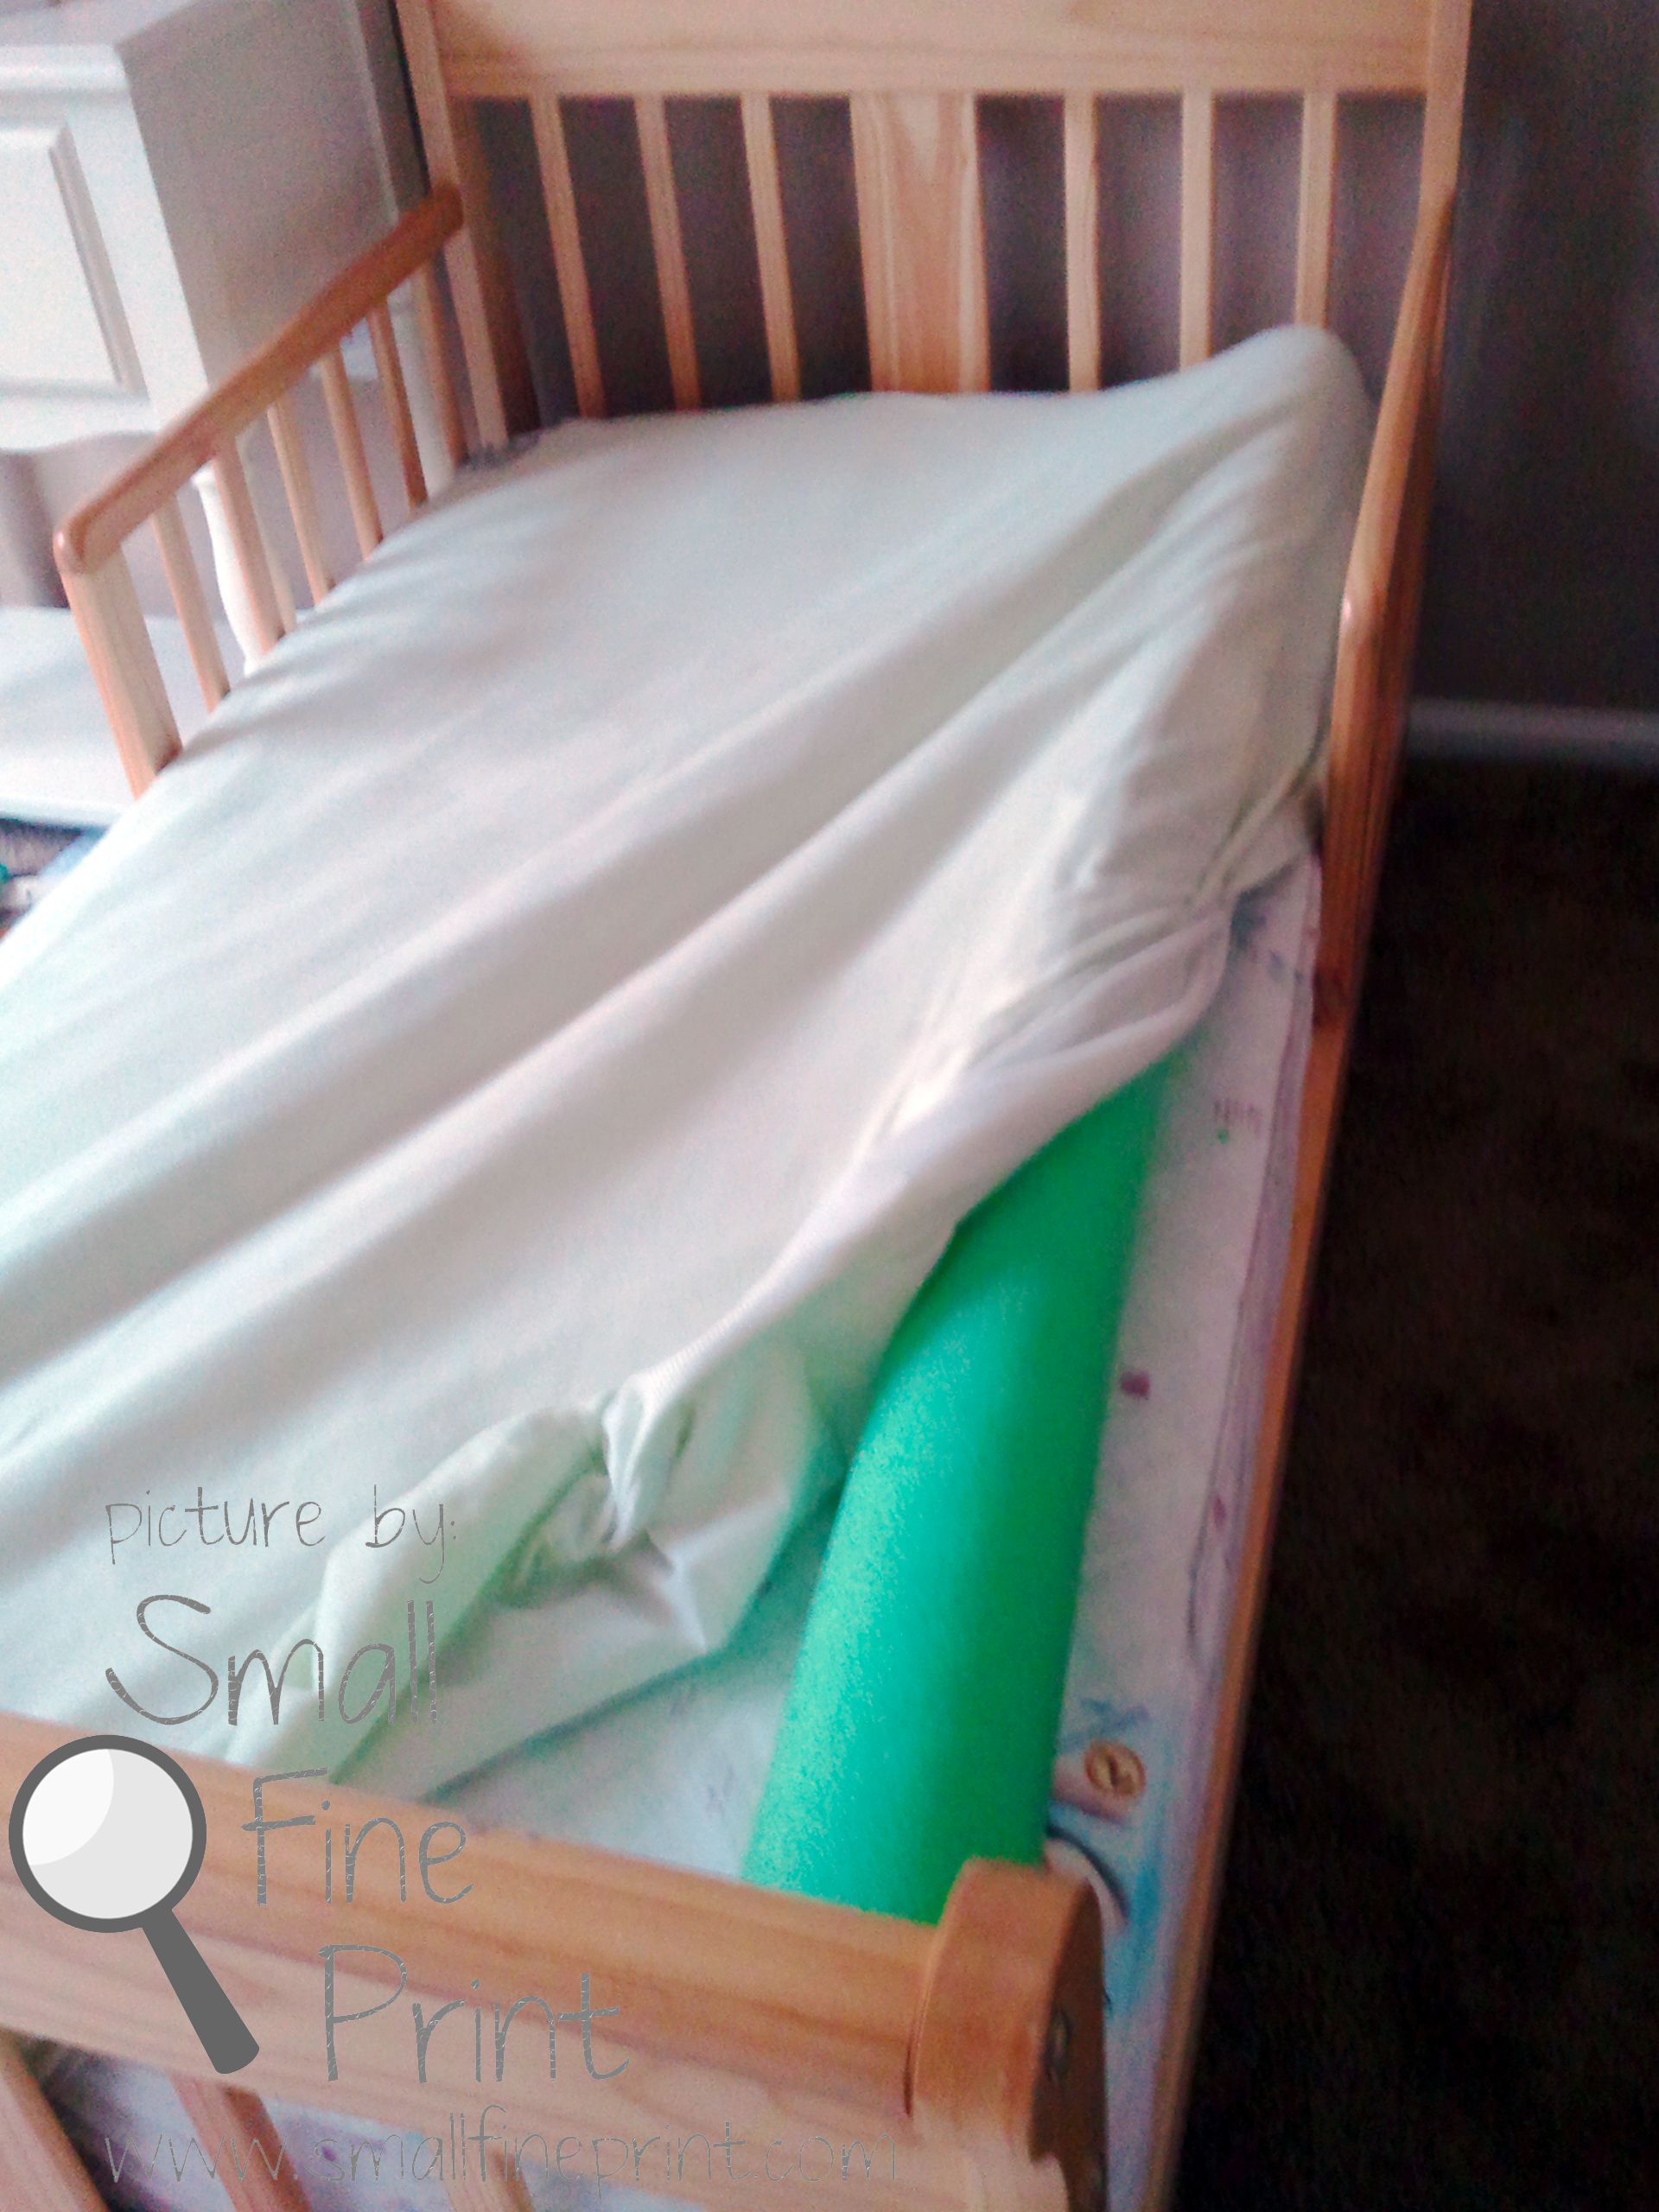 Use a pool noodle to keep your toddler from falling out of bed..what a great